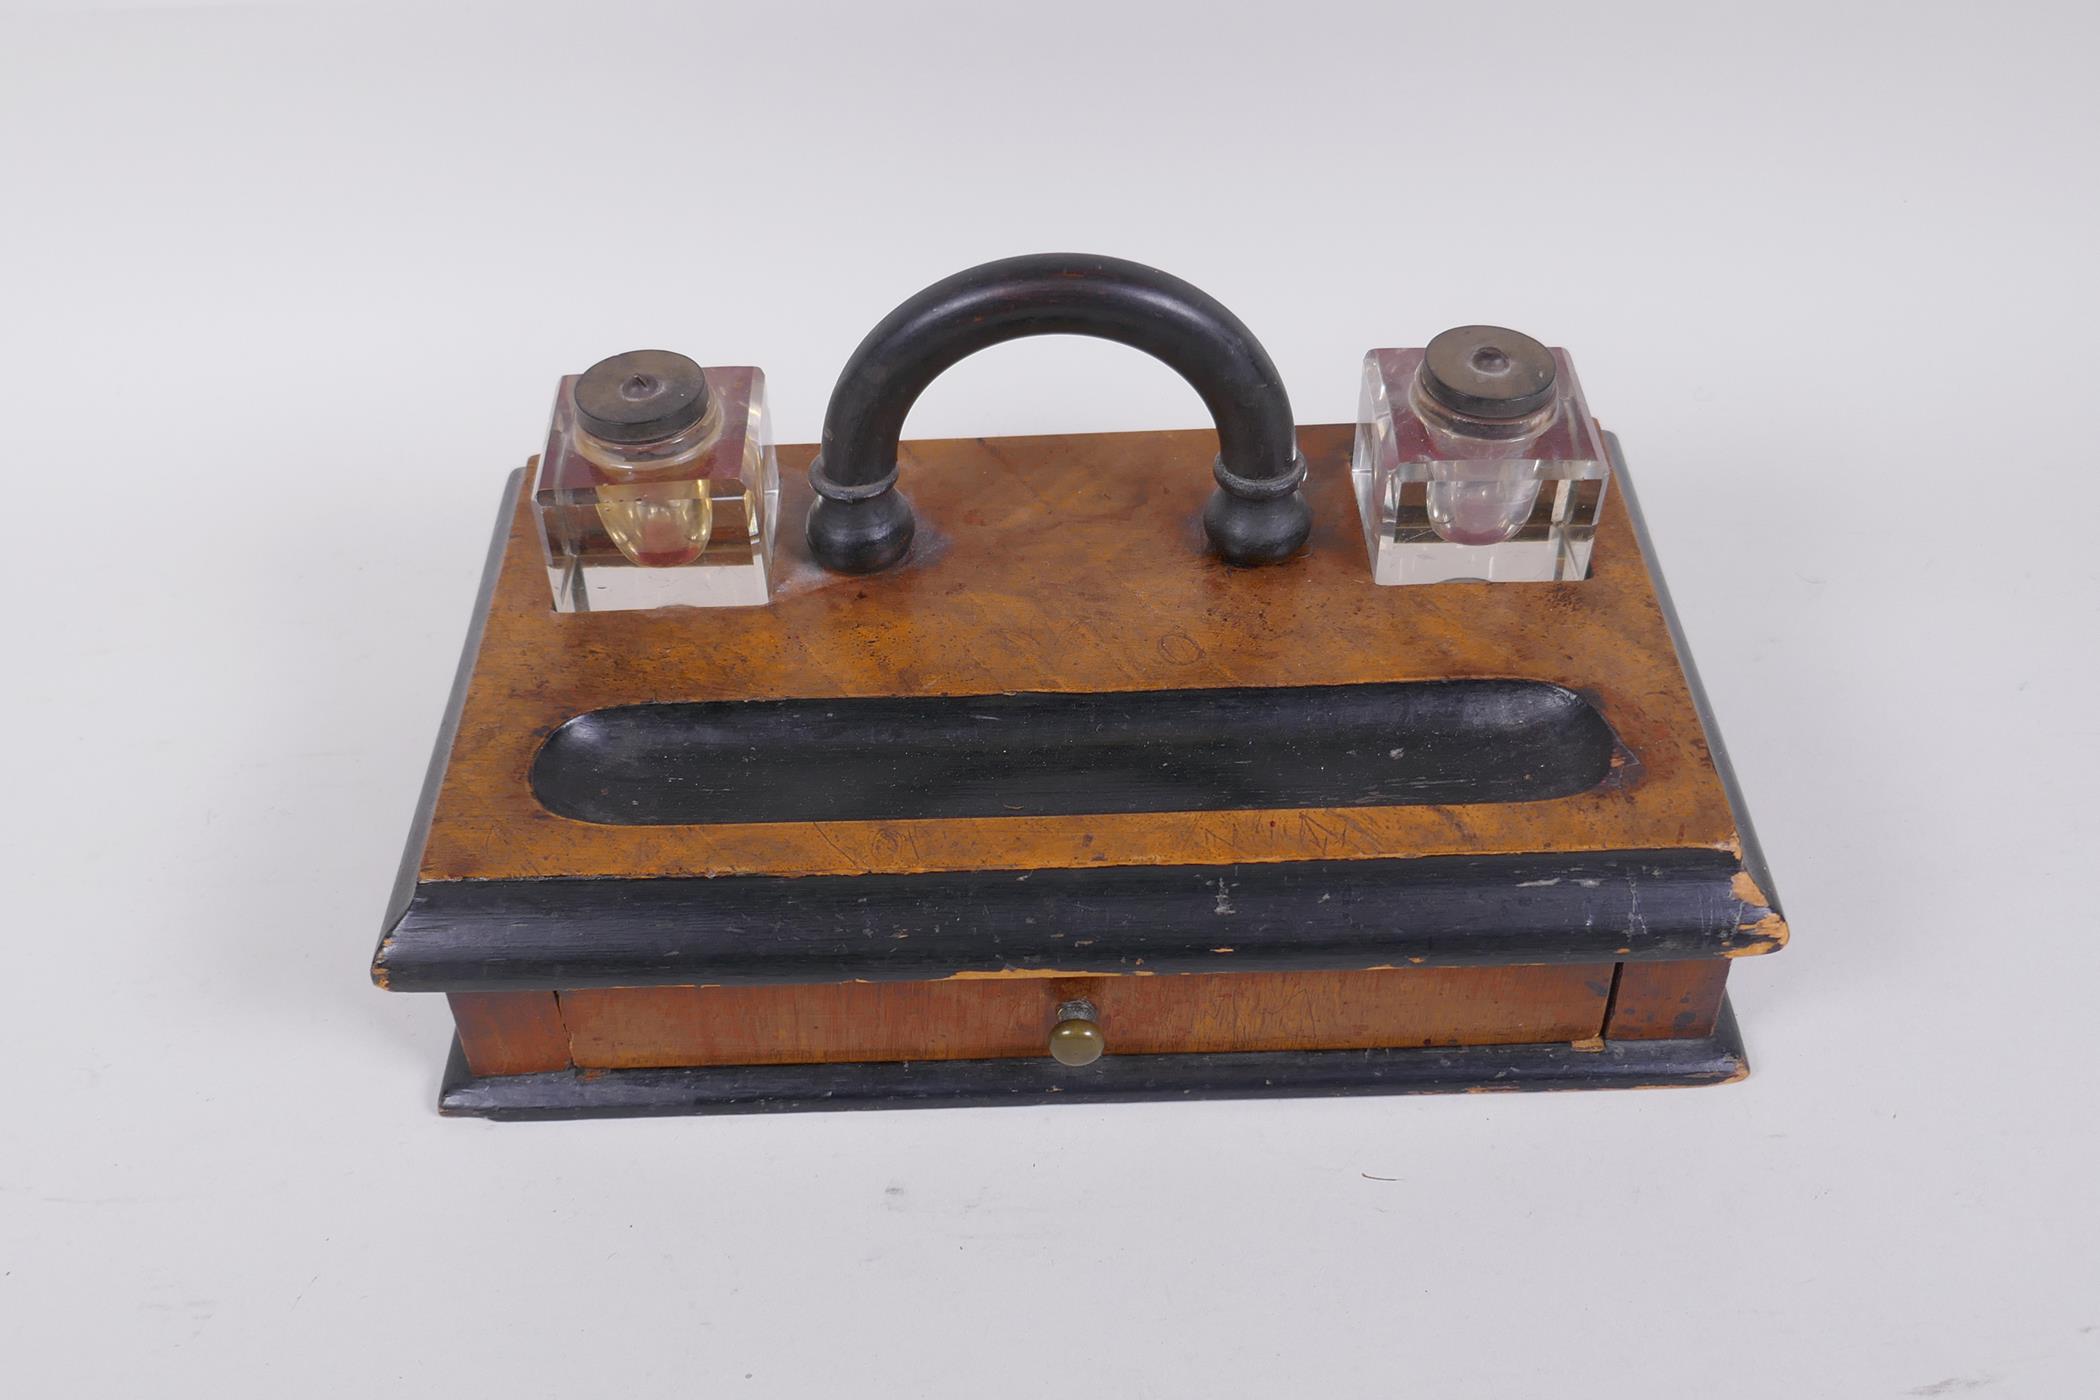 An antique ebonised walnut desk set with twin glass ink wells and a single drawer, 28 x 16cm - Image 2 of 3